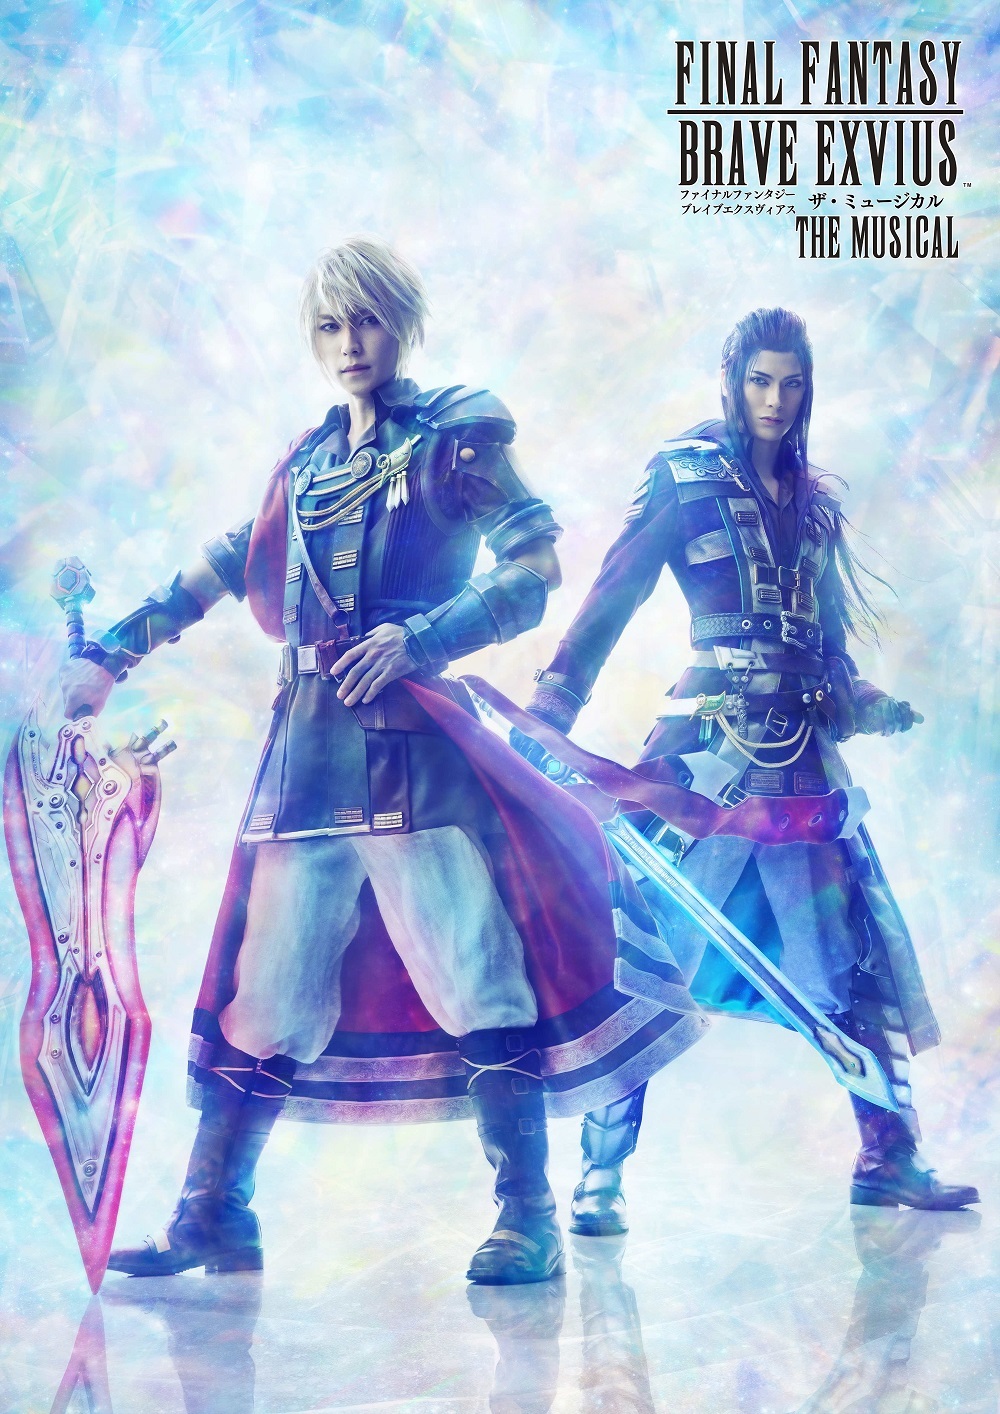  C)2015-2019 SQUARE ENIX CO., LTD. All Rights Reserved. (C)FFBE THE MUSICAL 製作委員会